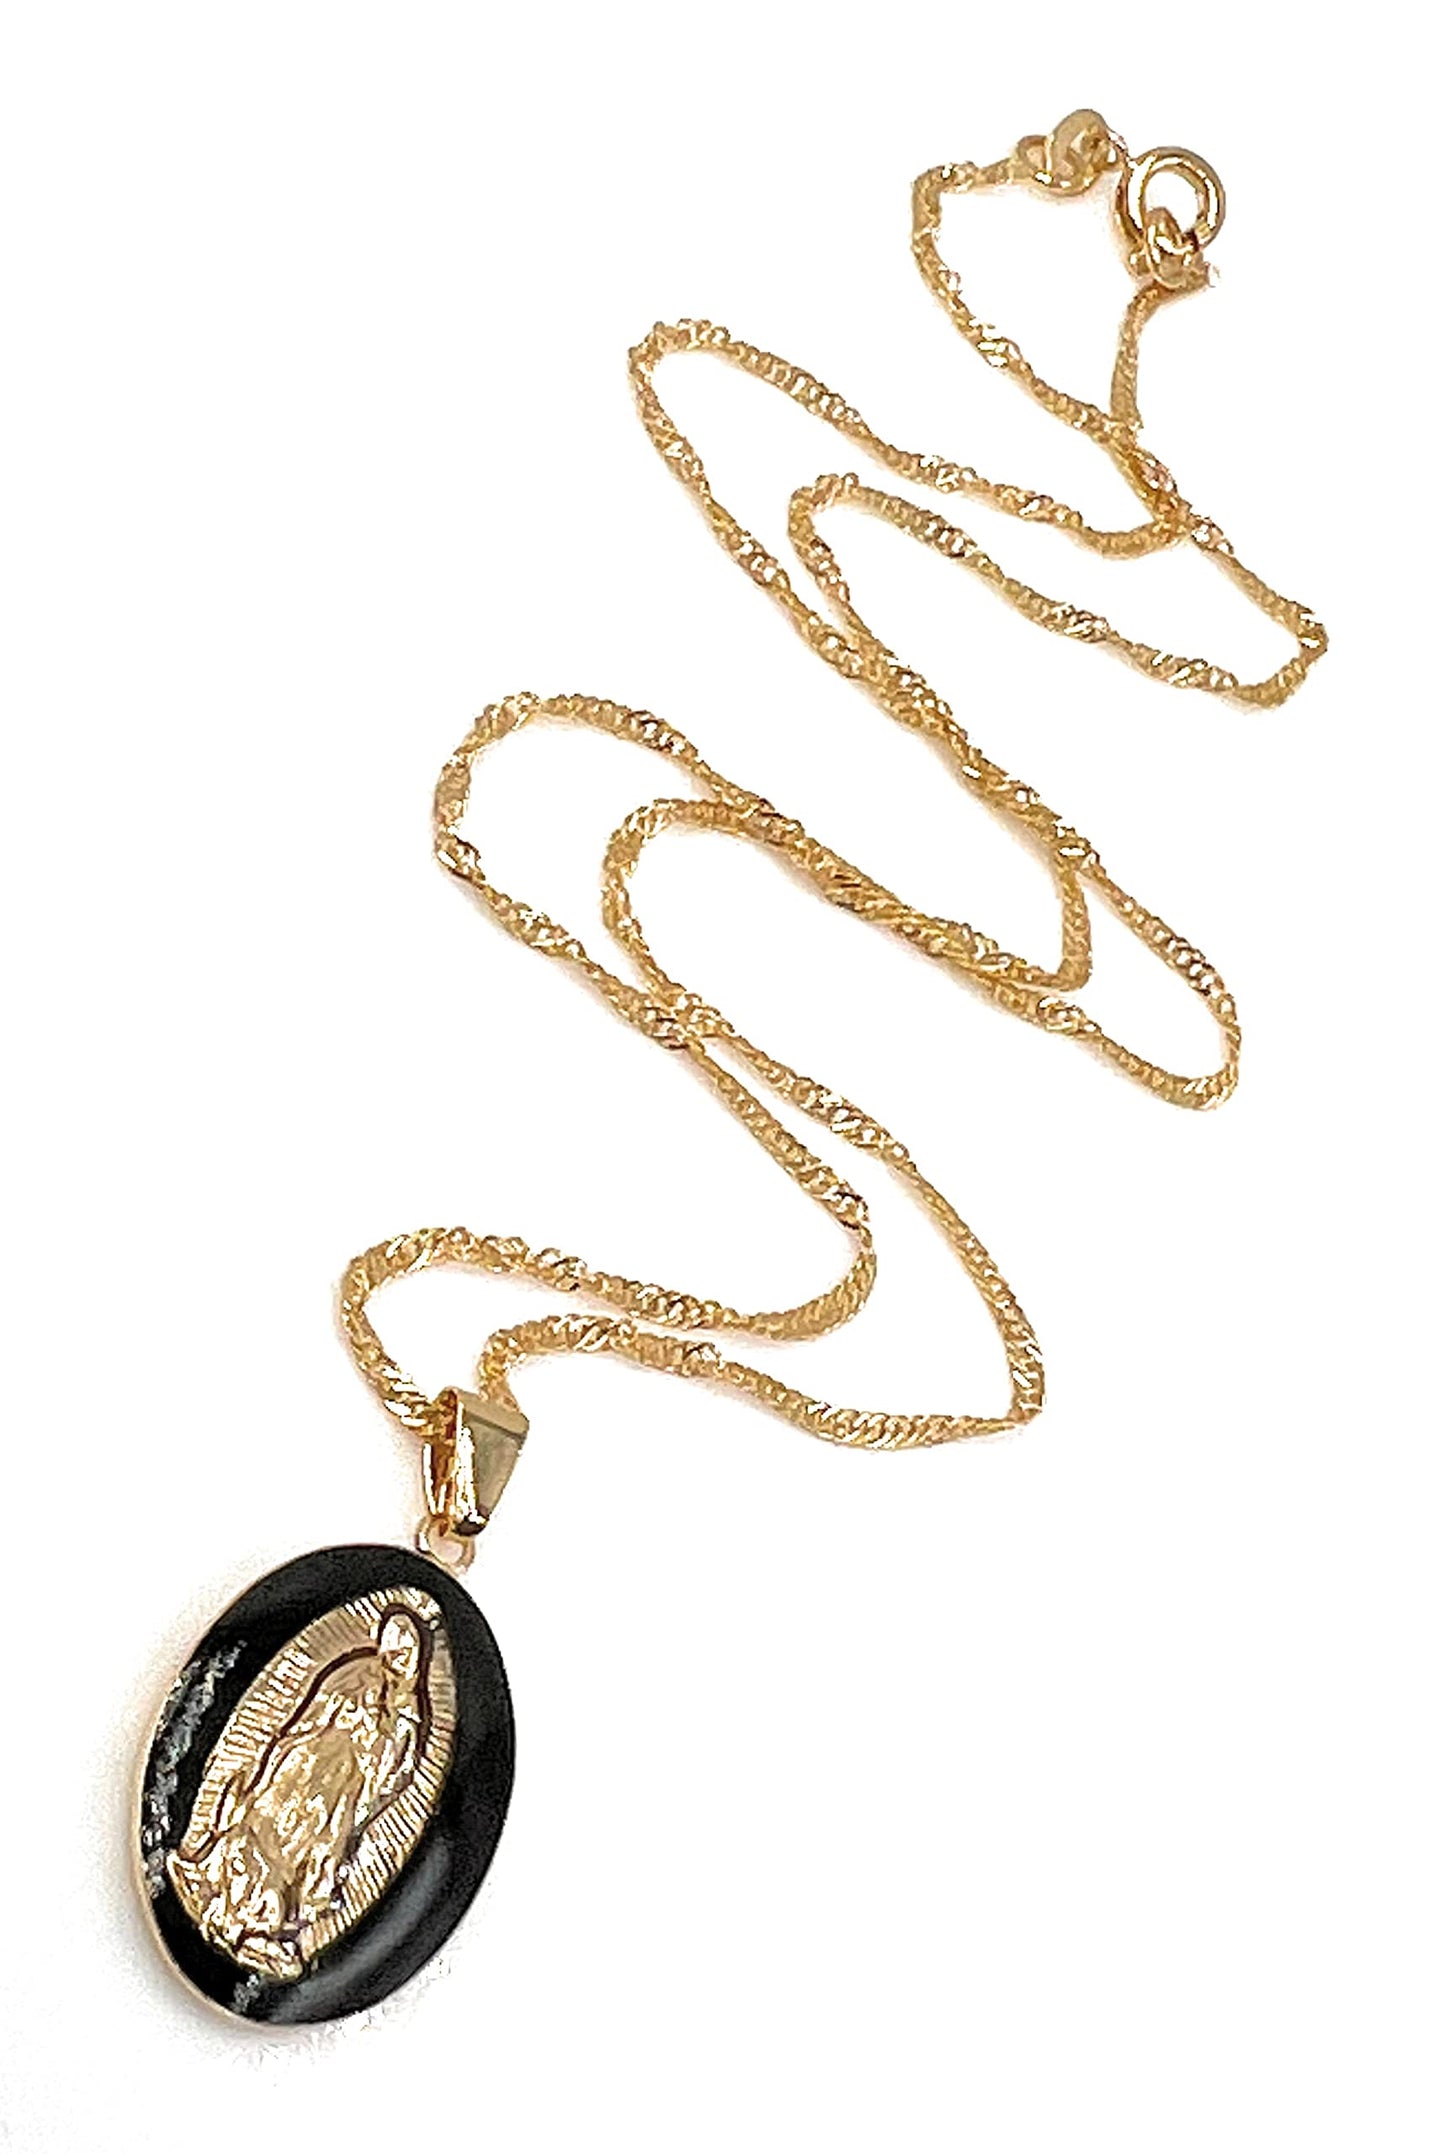 LESLIE BOULES Virgen de Guadalupe Black Medal Necklace 18K Gold Plated Chain Religious Jewelry for Women